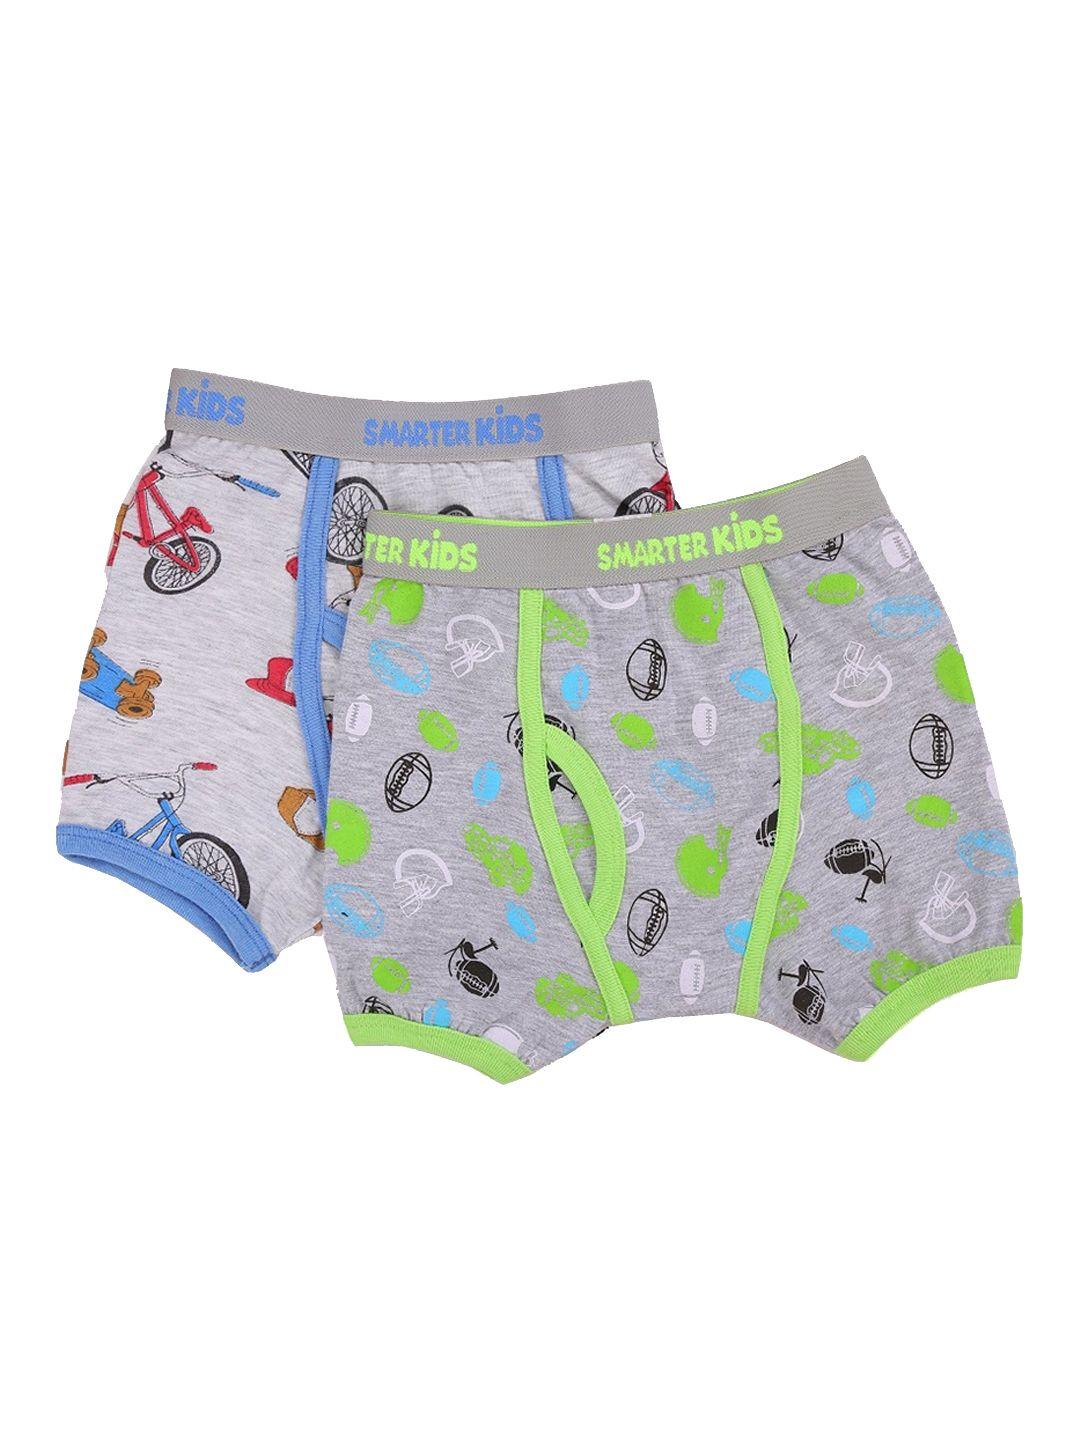 SMARTERKIDS Boys Pack of 4 Assorted Printed Cotton Trunk